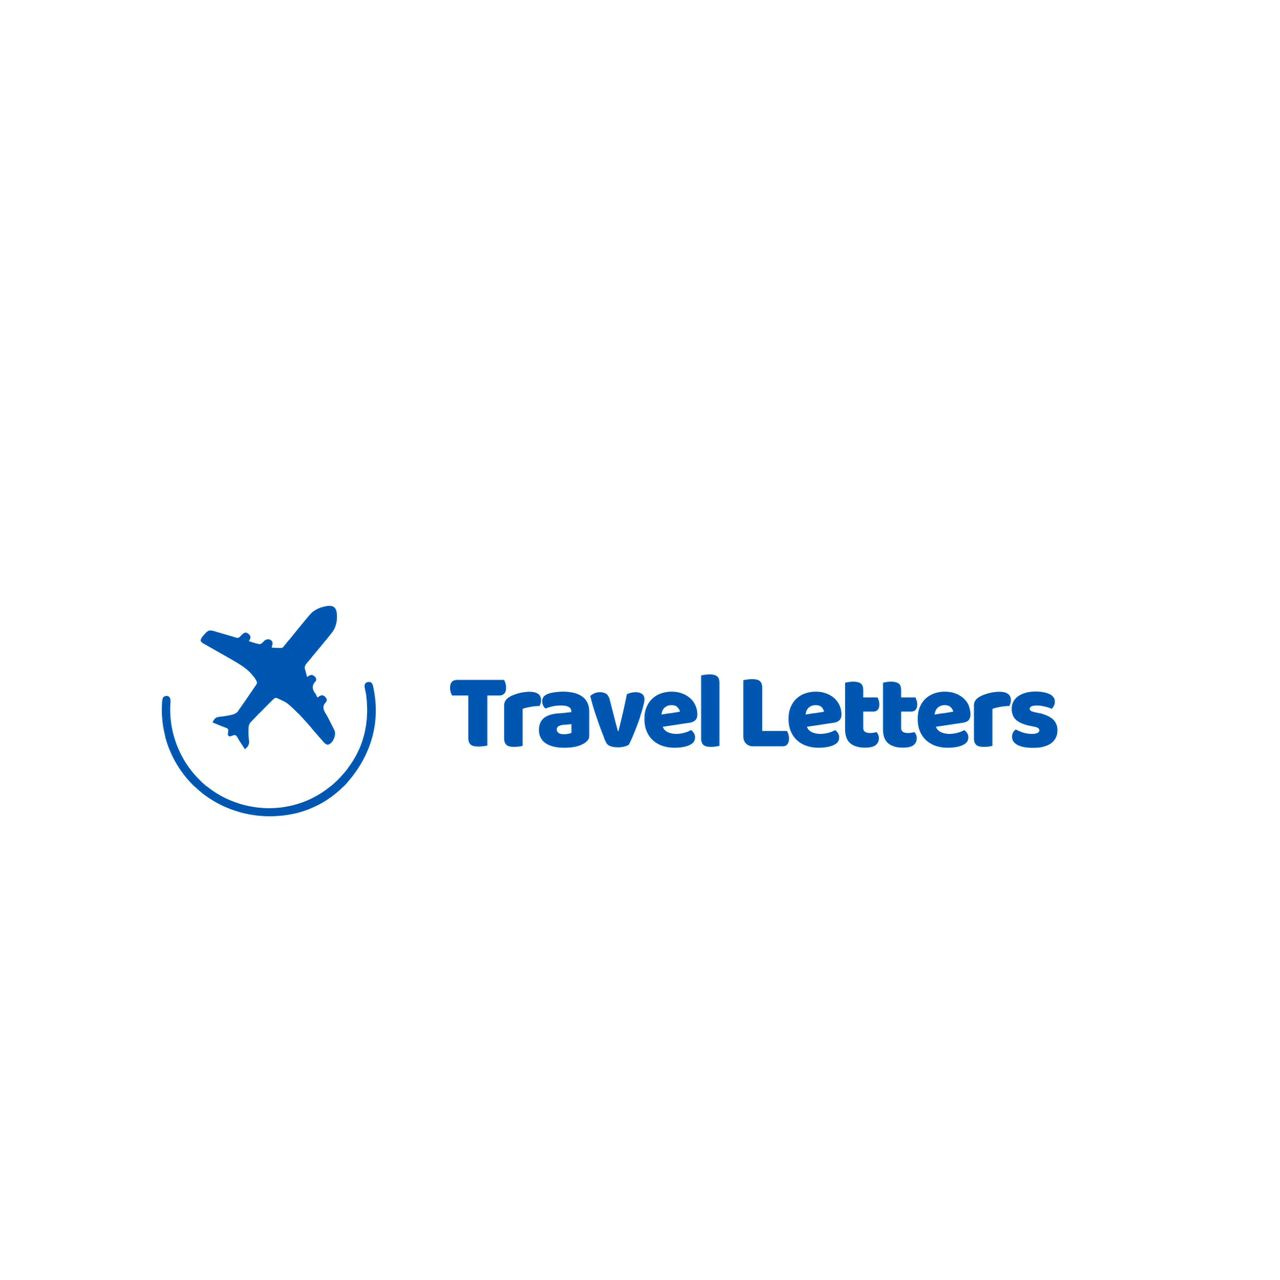 Travelletters